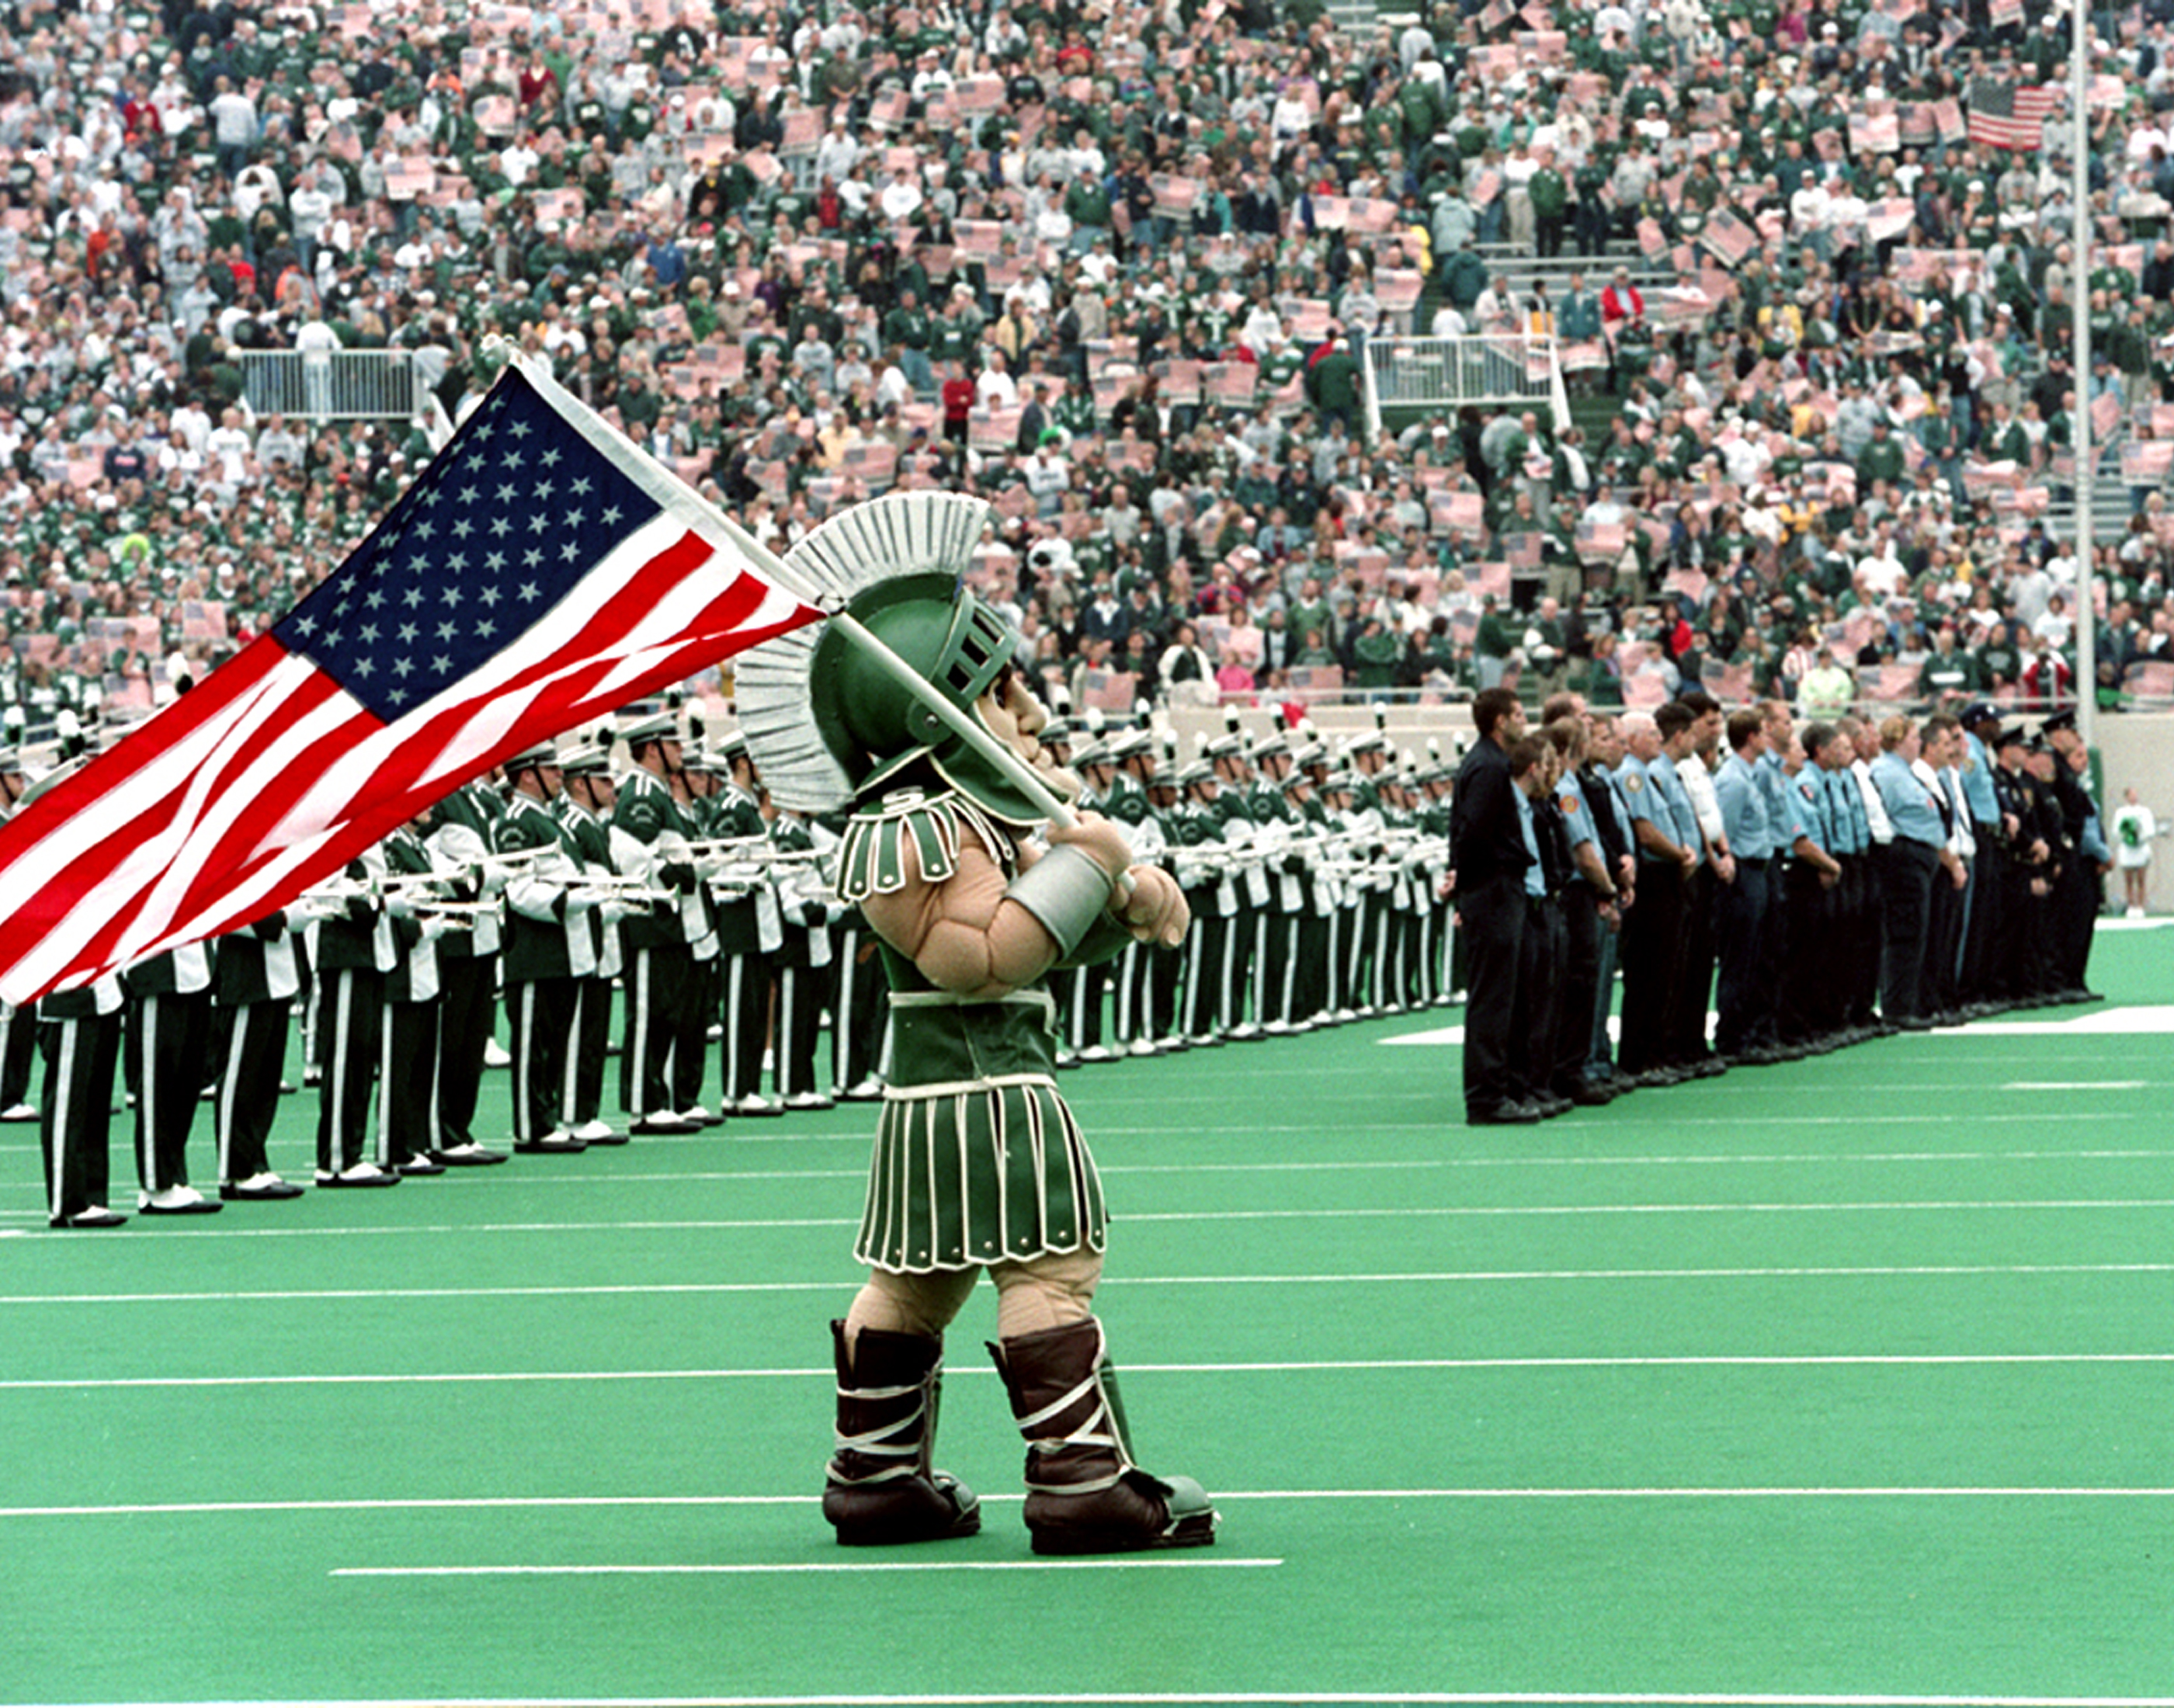 Sparty with a US flag